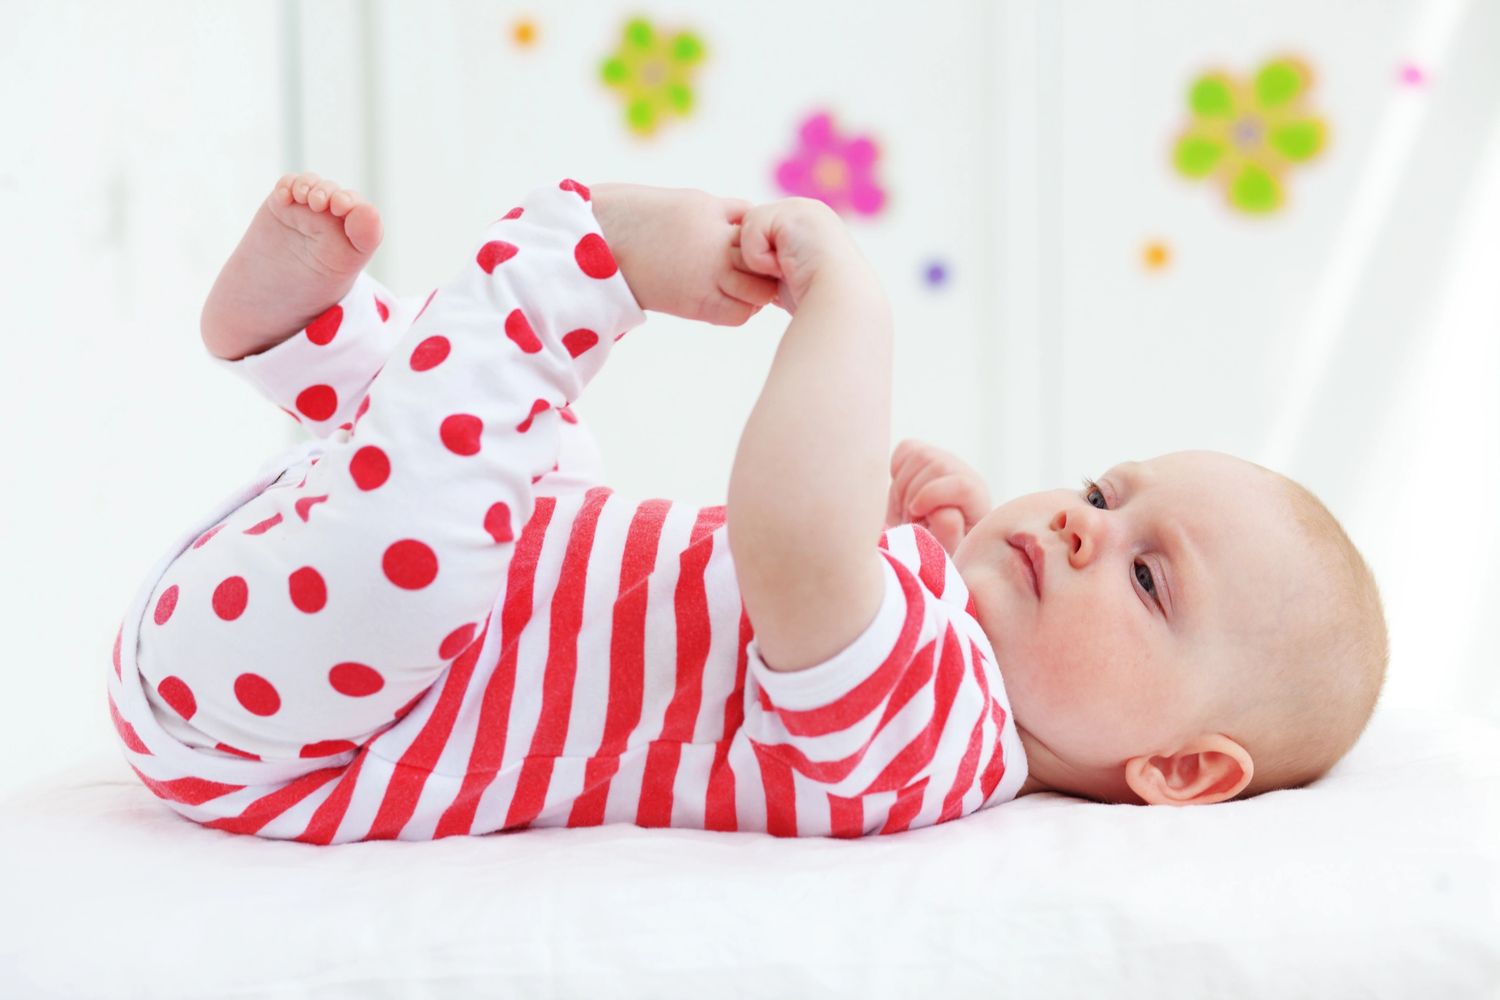 Baby wearing baby clothes with white and red stripes and dots